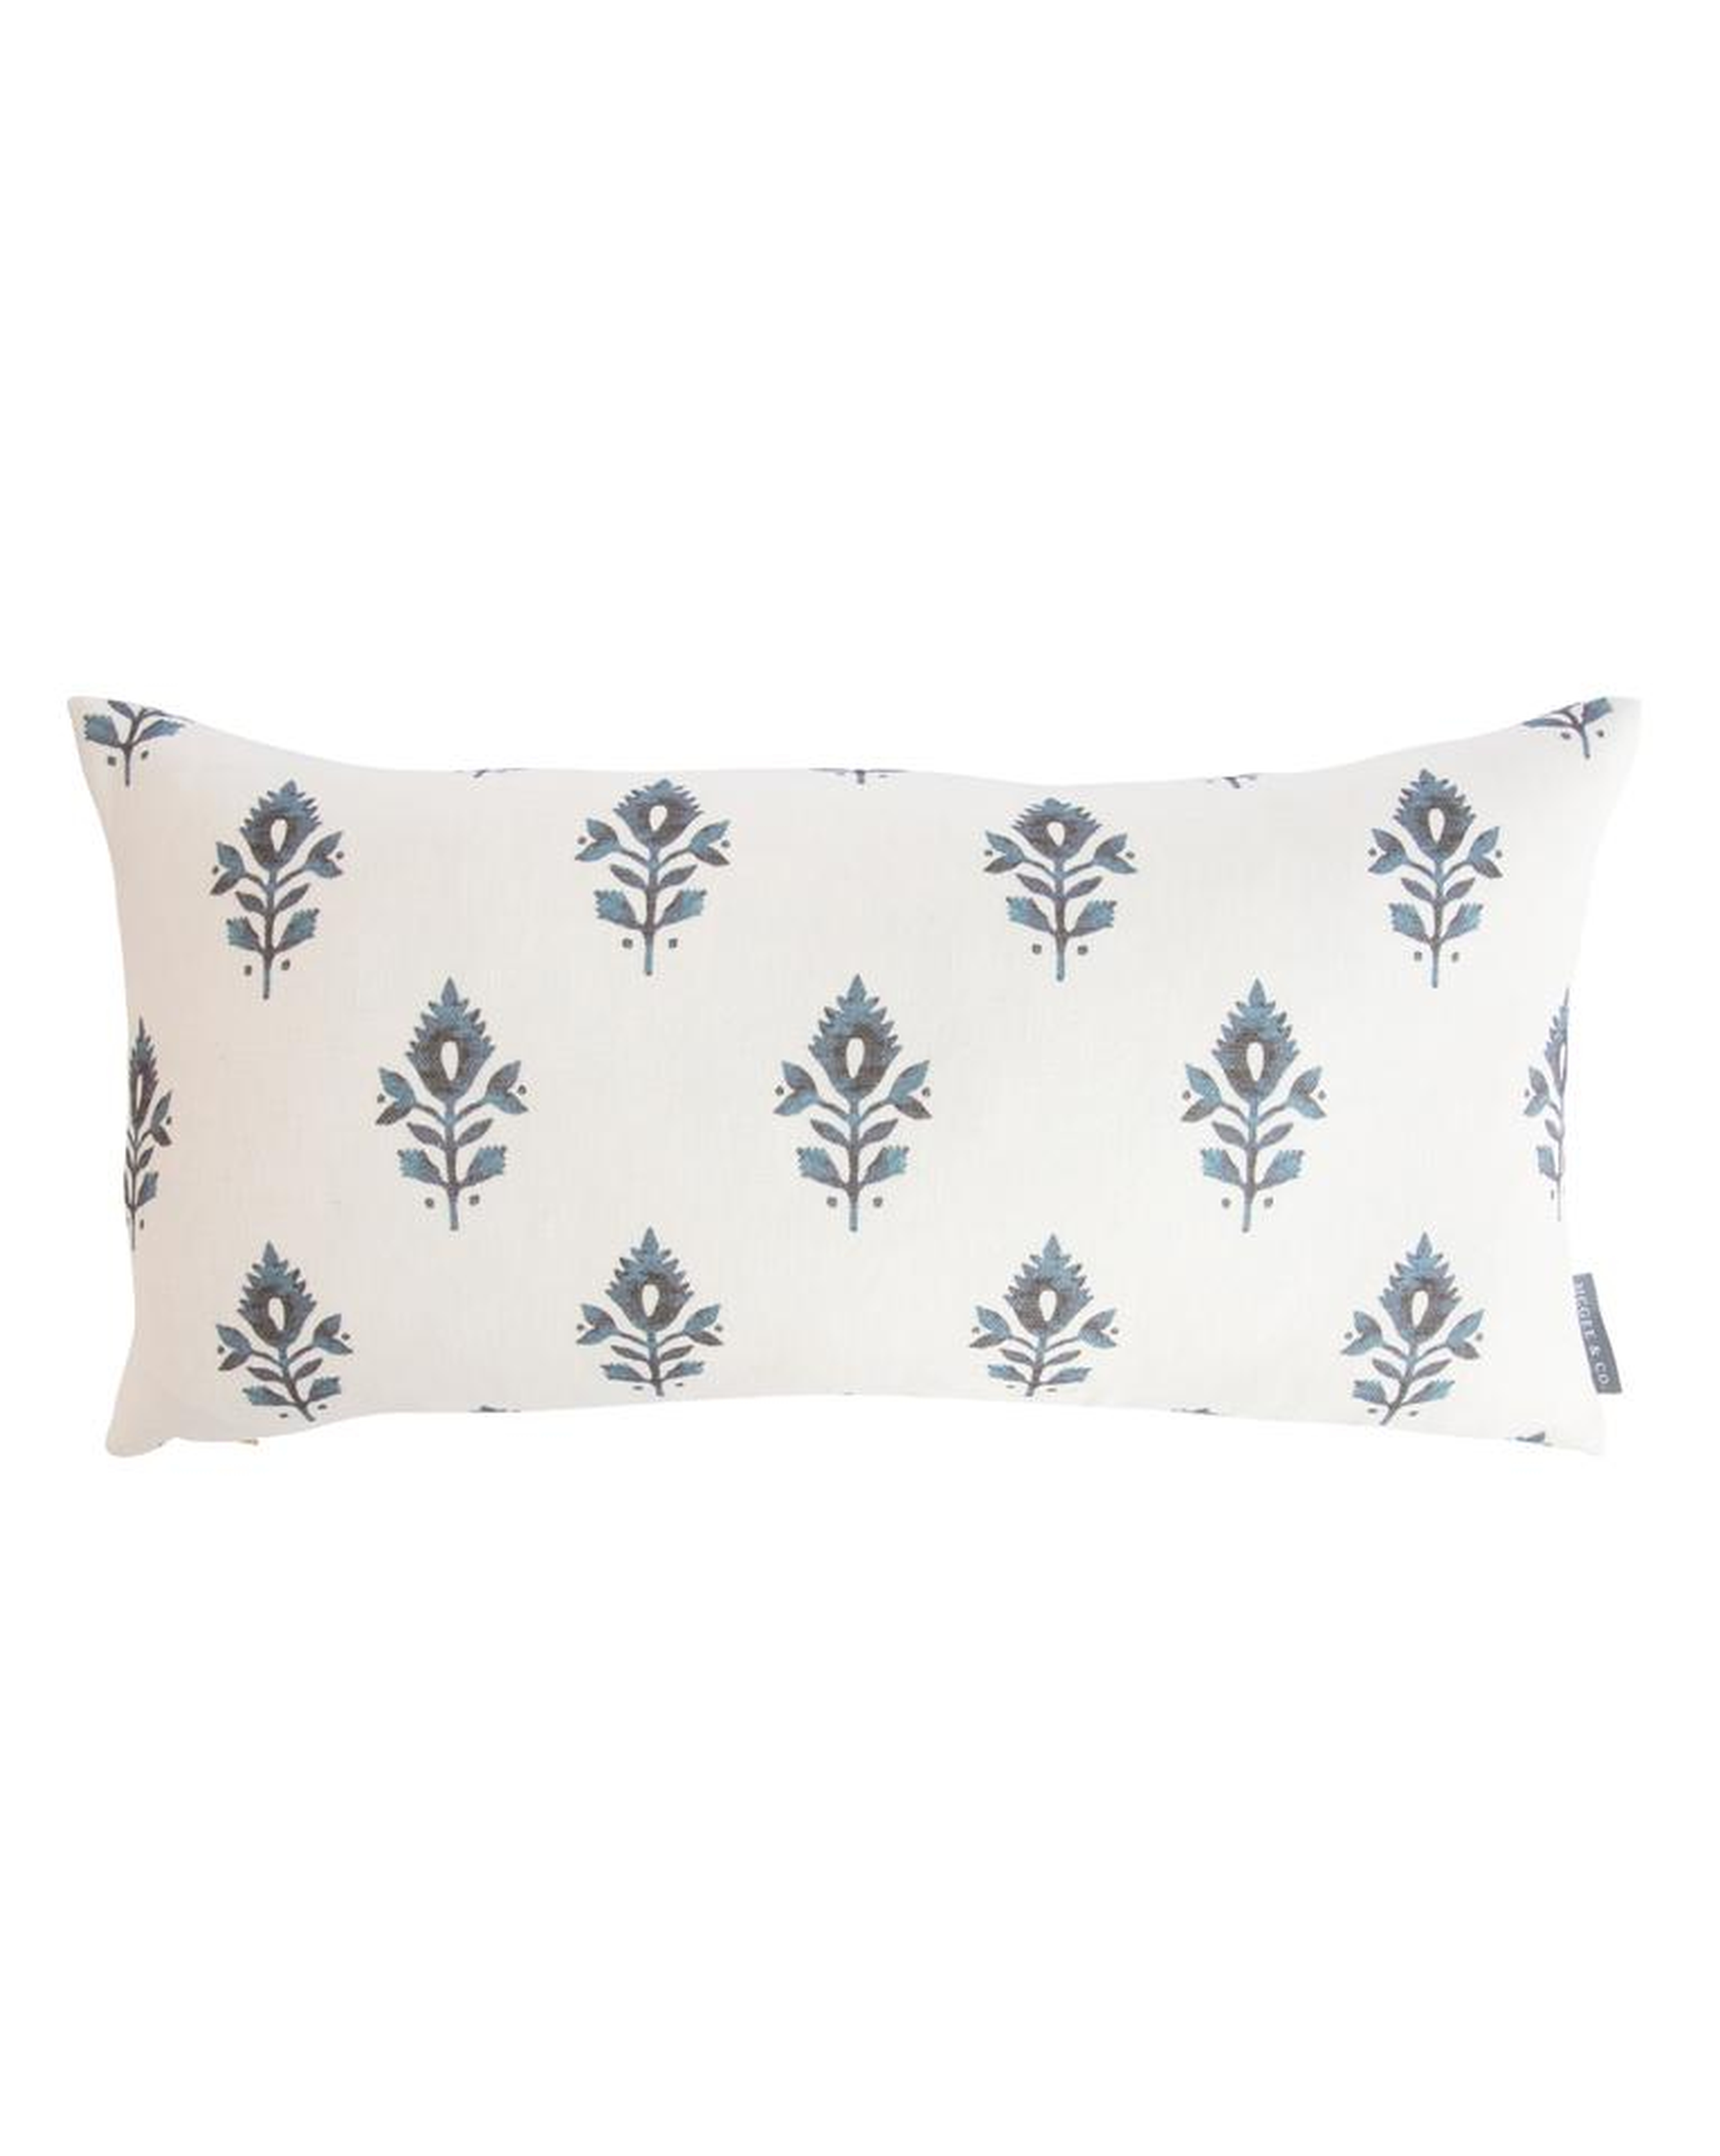 ADDISON BLOCK PRINT PILLOW COVER WITHOUT INSERT, 12" x 24" - McGee & Co.